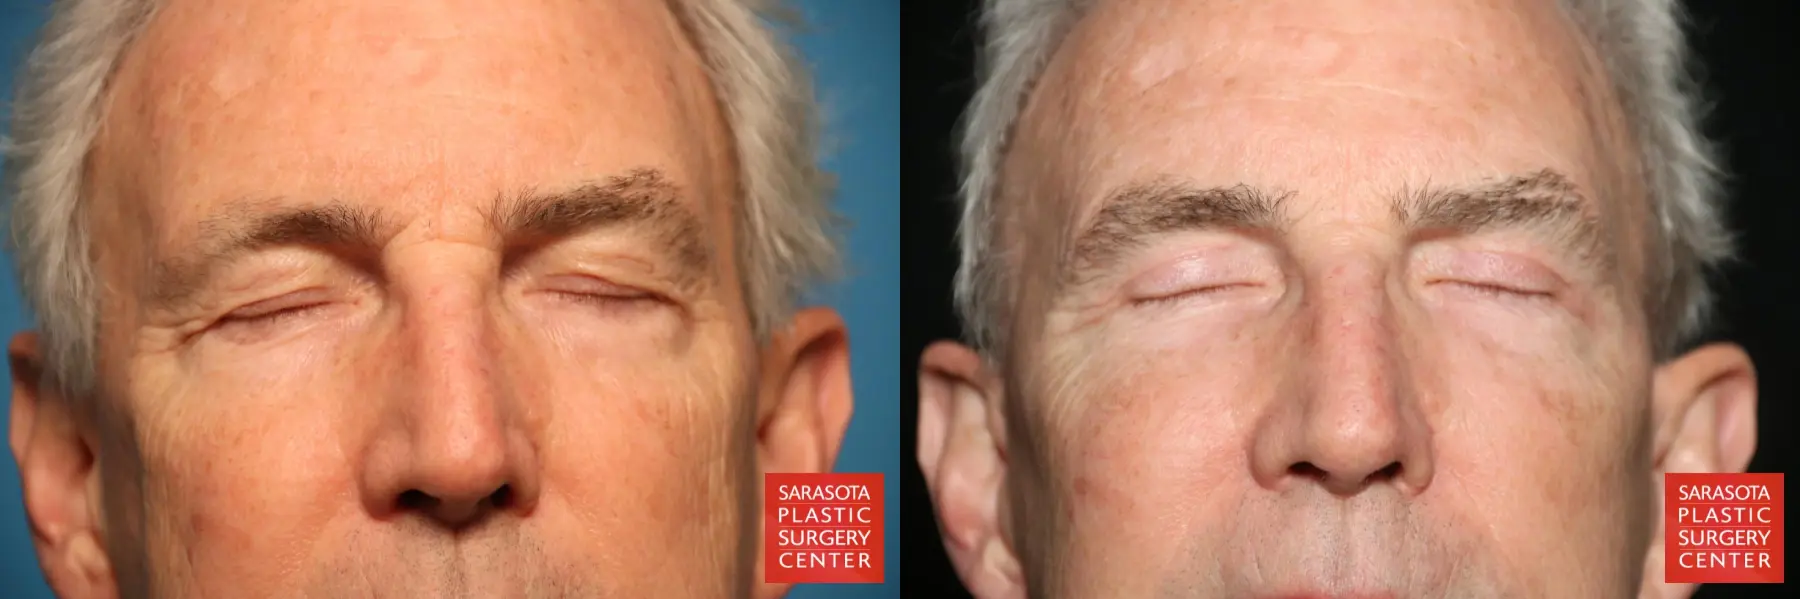 Eyelid Surgery: Patient 7 - Before and After 3